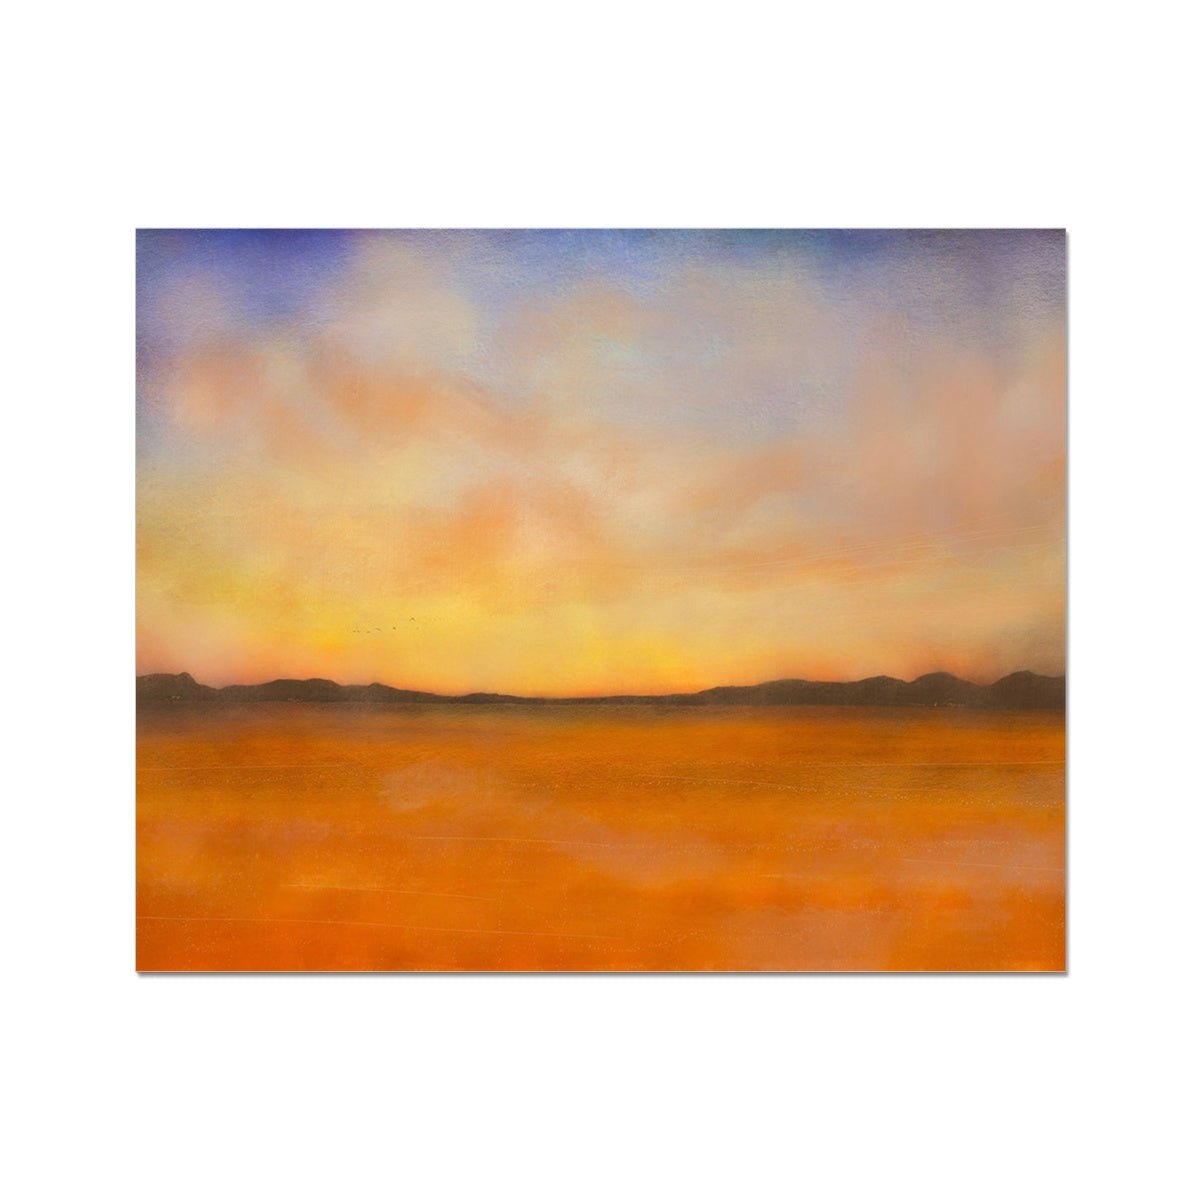 Islay Dawn Painting | Artist Proof Collector Prints From Scotland-Artist Proof Collector Prints-Hebridean Islands Art Gallery-20"x16"-Paintings, Prints, Homeware, Art Gifts From Scotland By Scottish Artist Kevin Hunter